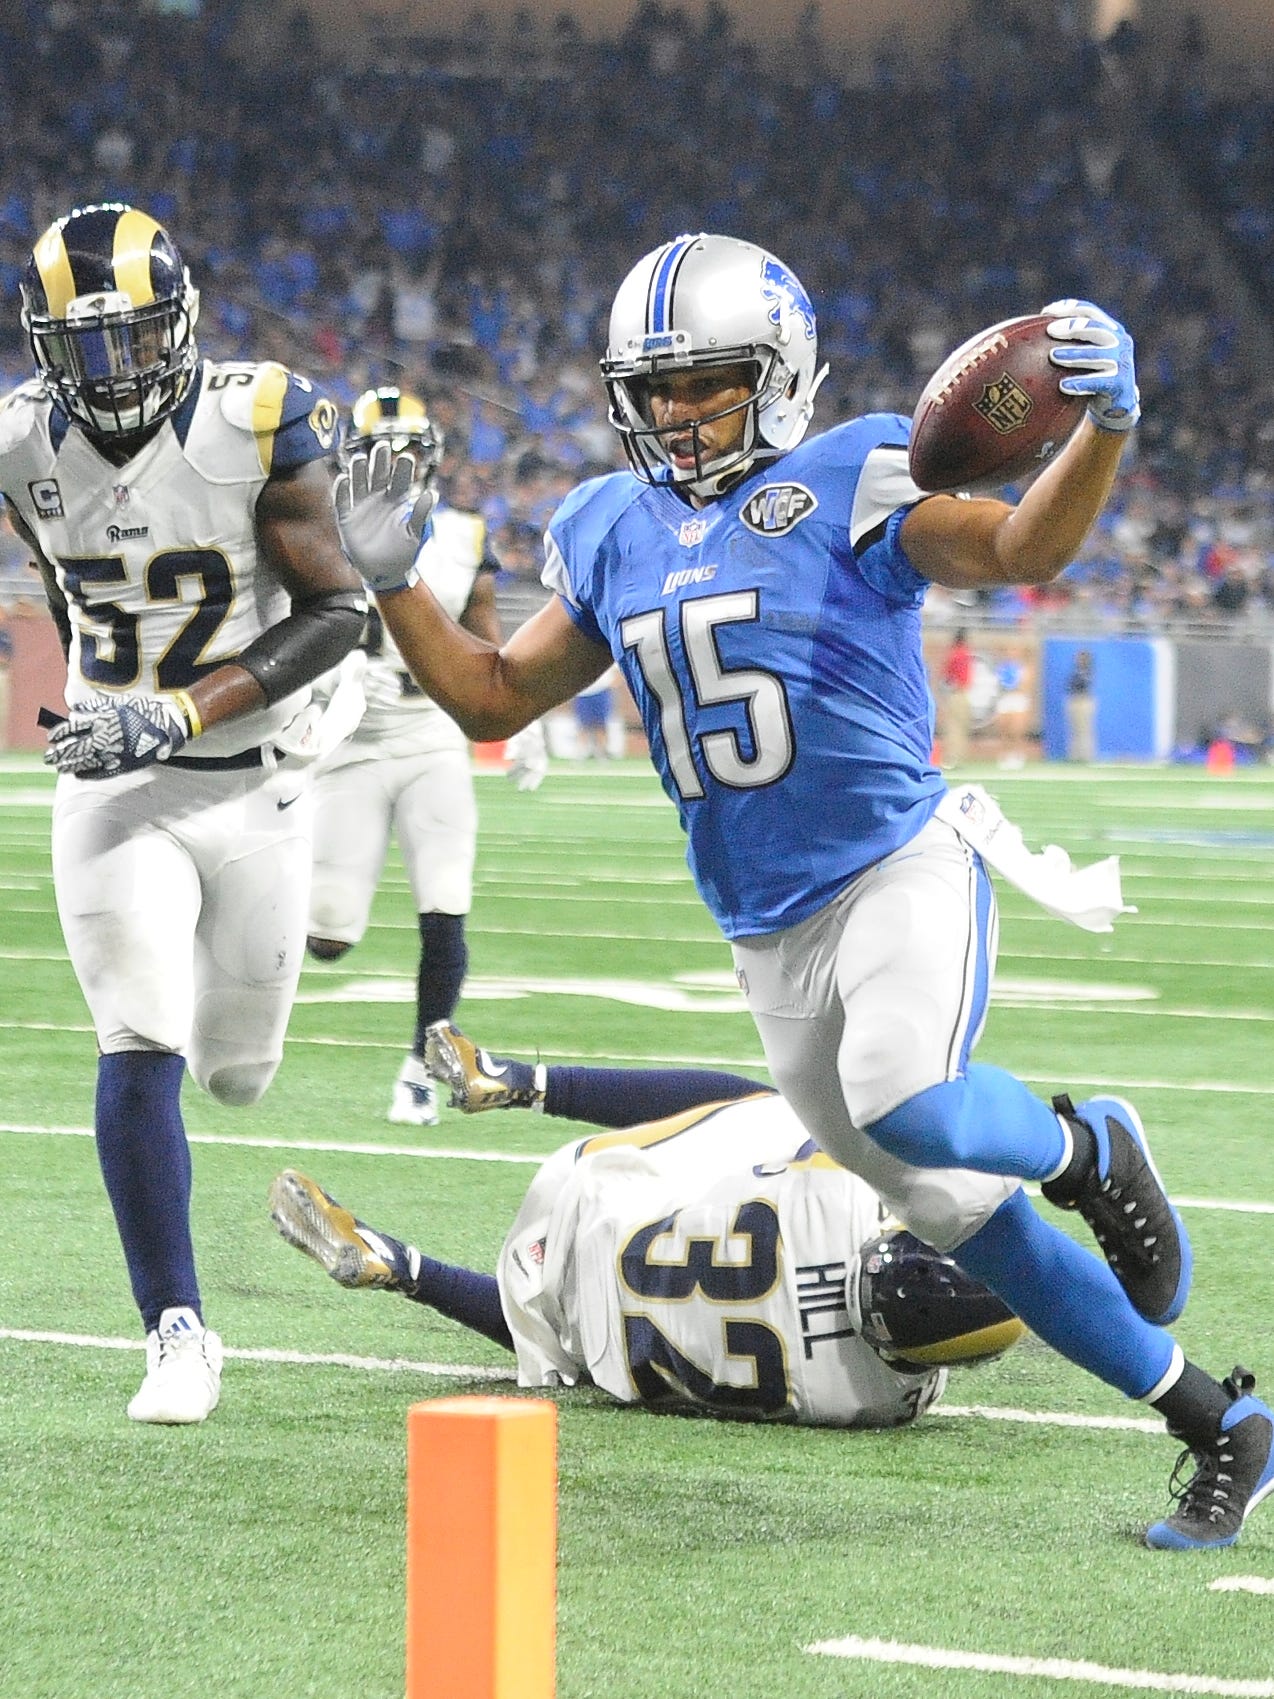 Lions wide receiver Golden Tate tip toes into the end zone after a reception from quarterback Matthew Stafford, to tie the game up at 28 late in the fourth quarter.